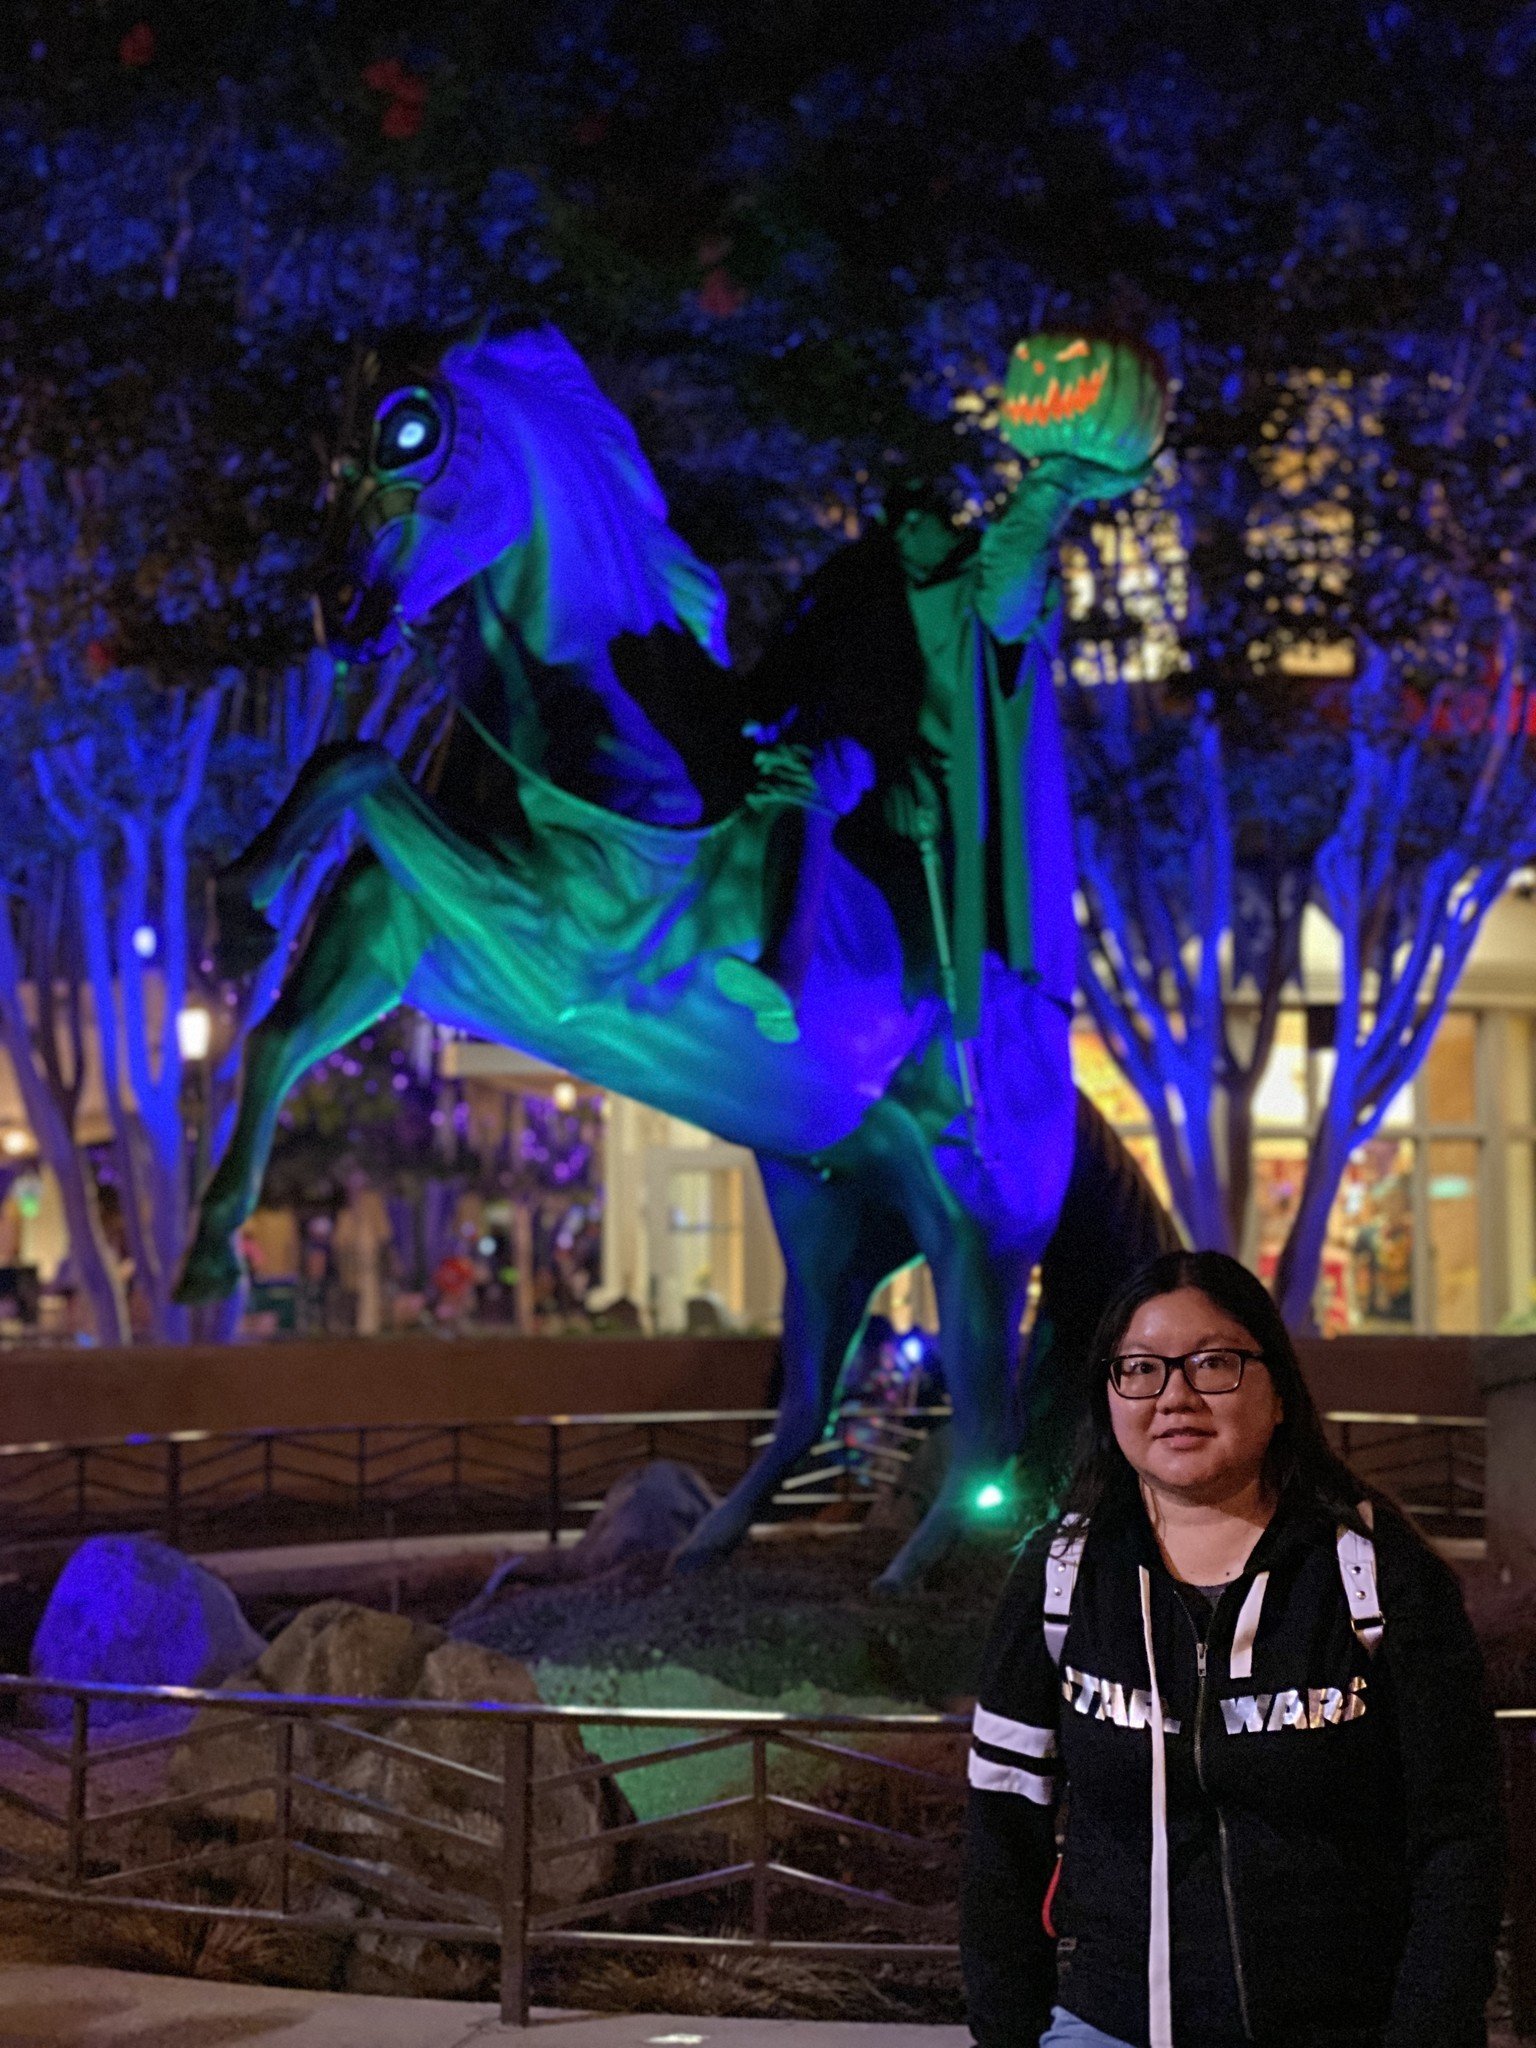 Christine poses for a portrait in front of the Headless Horseman at Disney California Adventure during Halloween